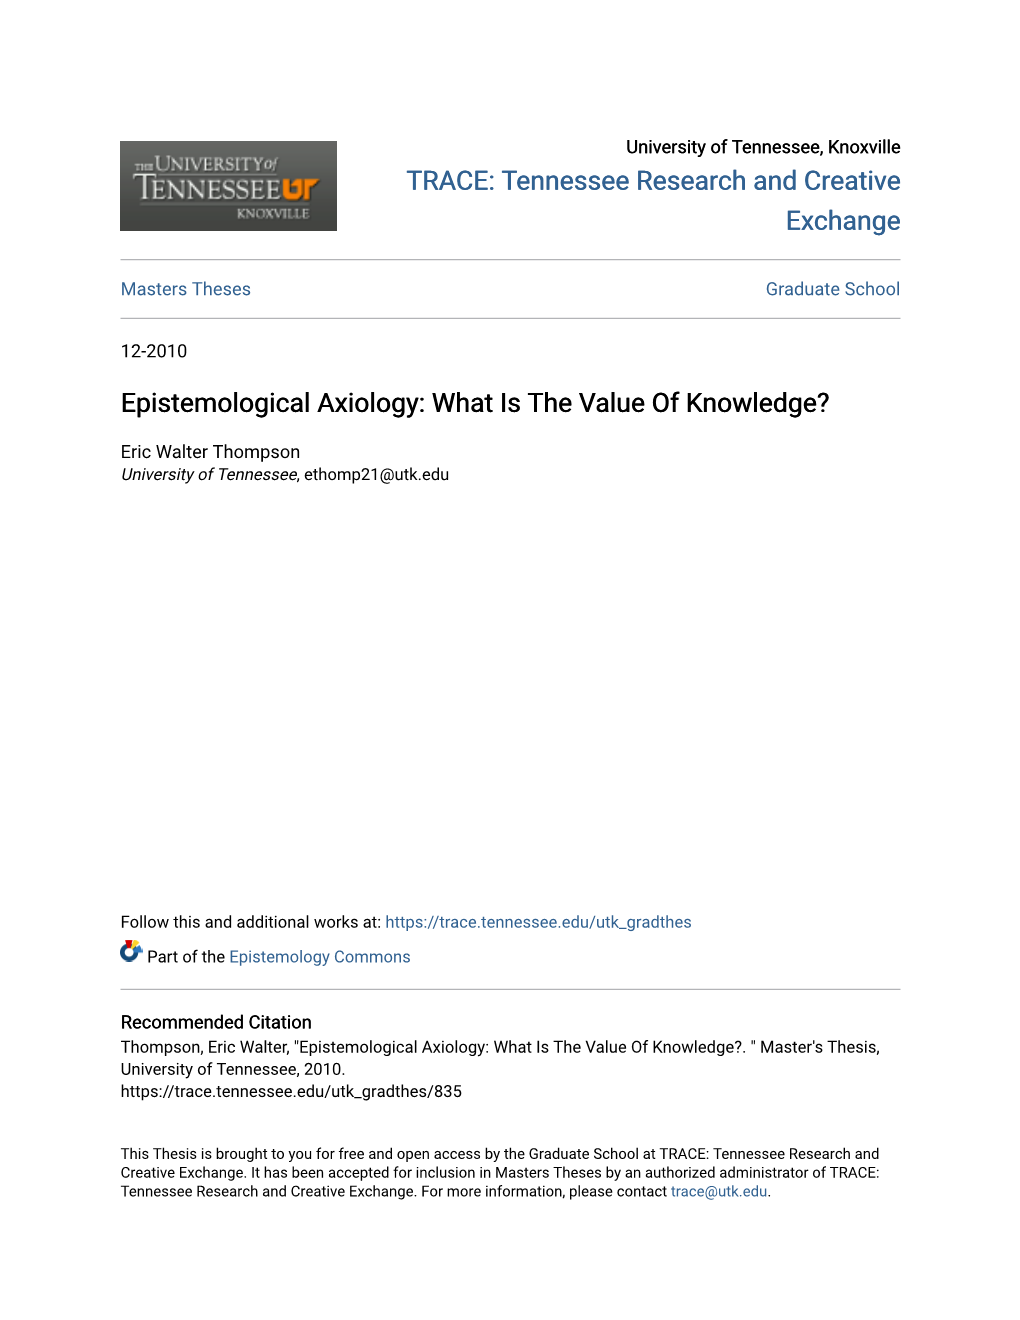 Epistemological Axiology: What Is the Value of Knowledge?